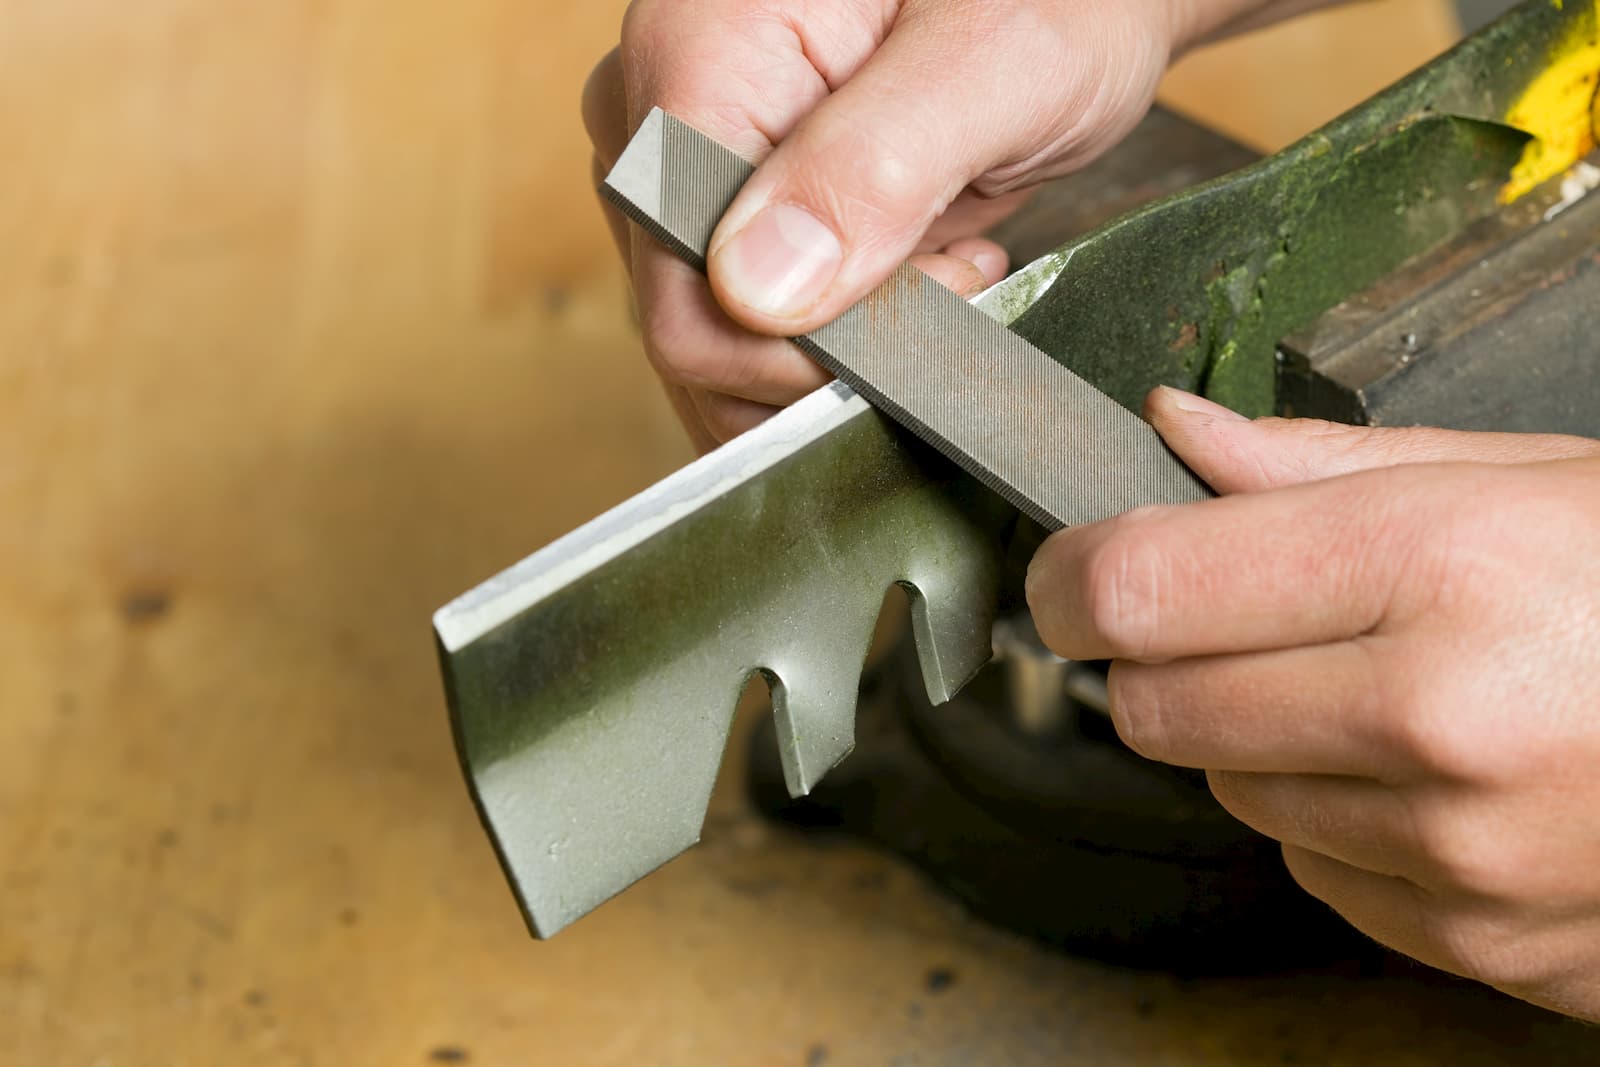 Tips for Loosening your Lawn Mower Blade